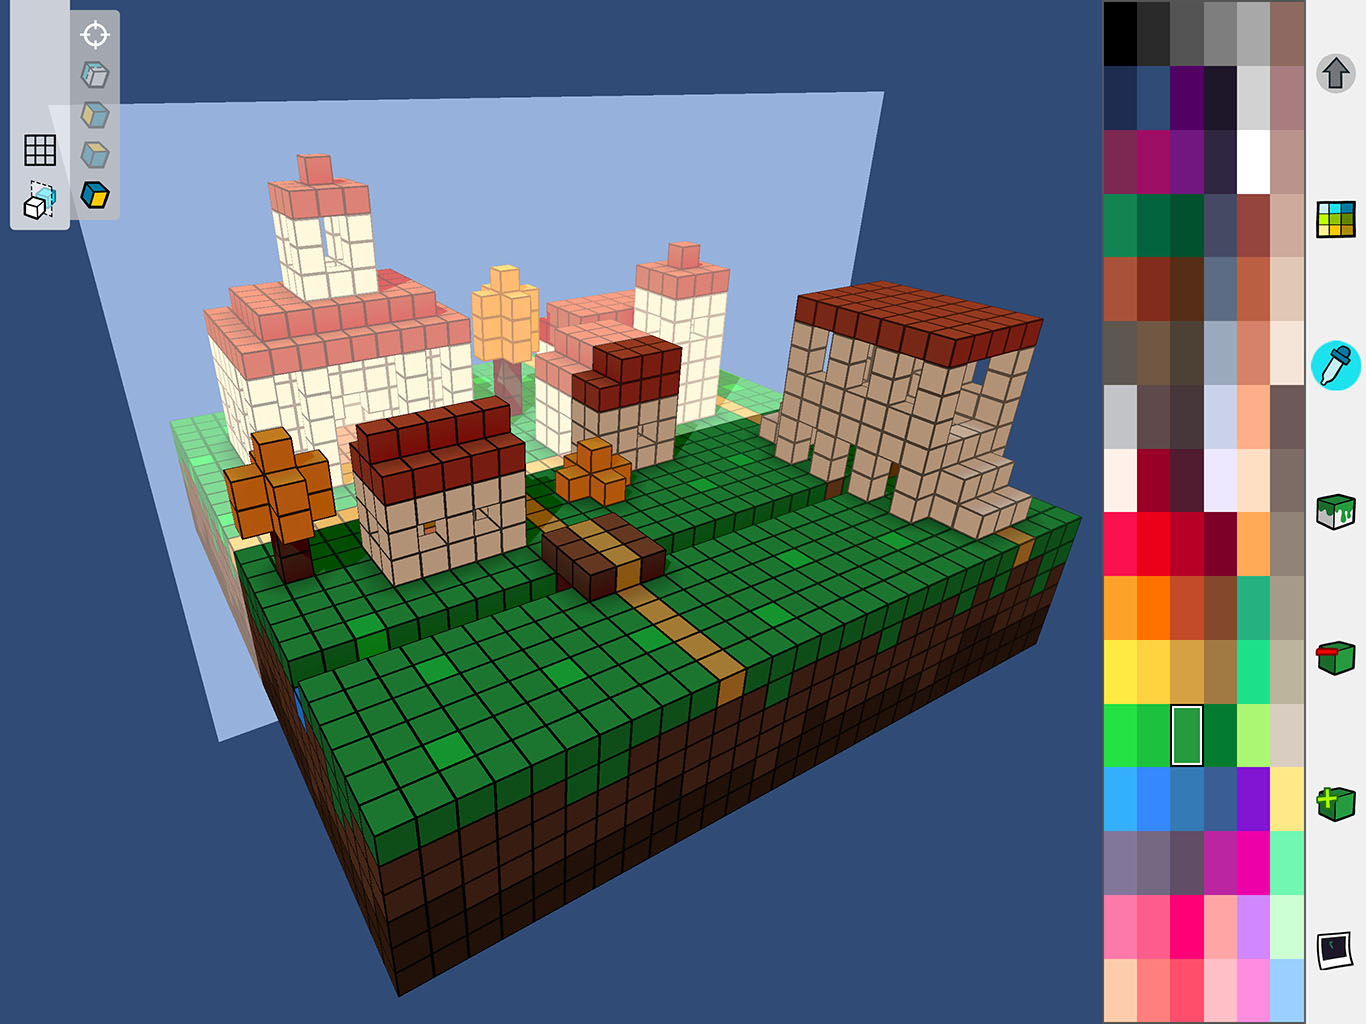 A screenshot of the Particubes app with one of its sample voxel models